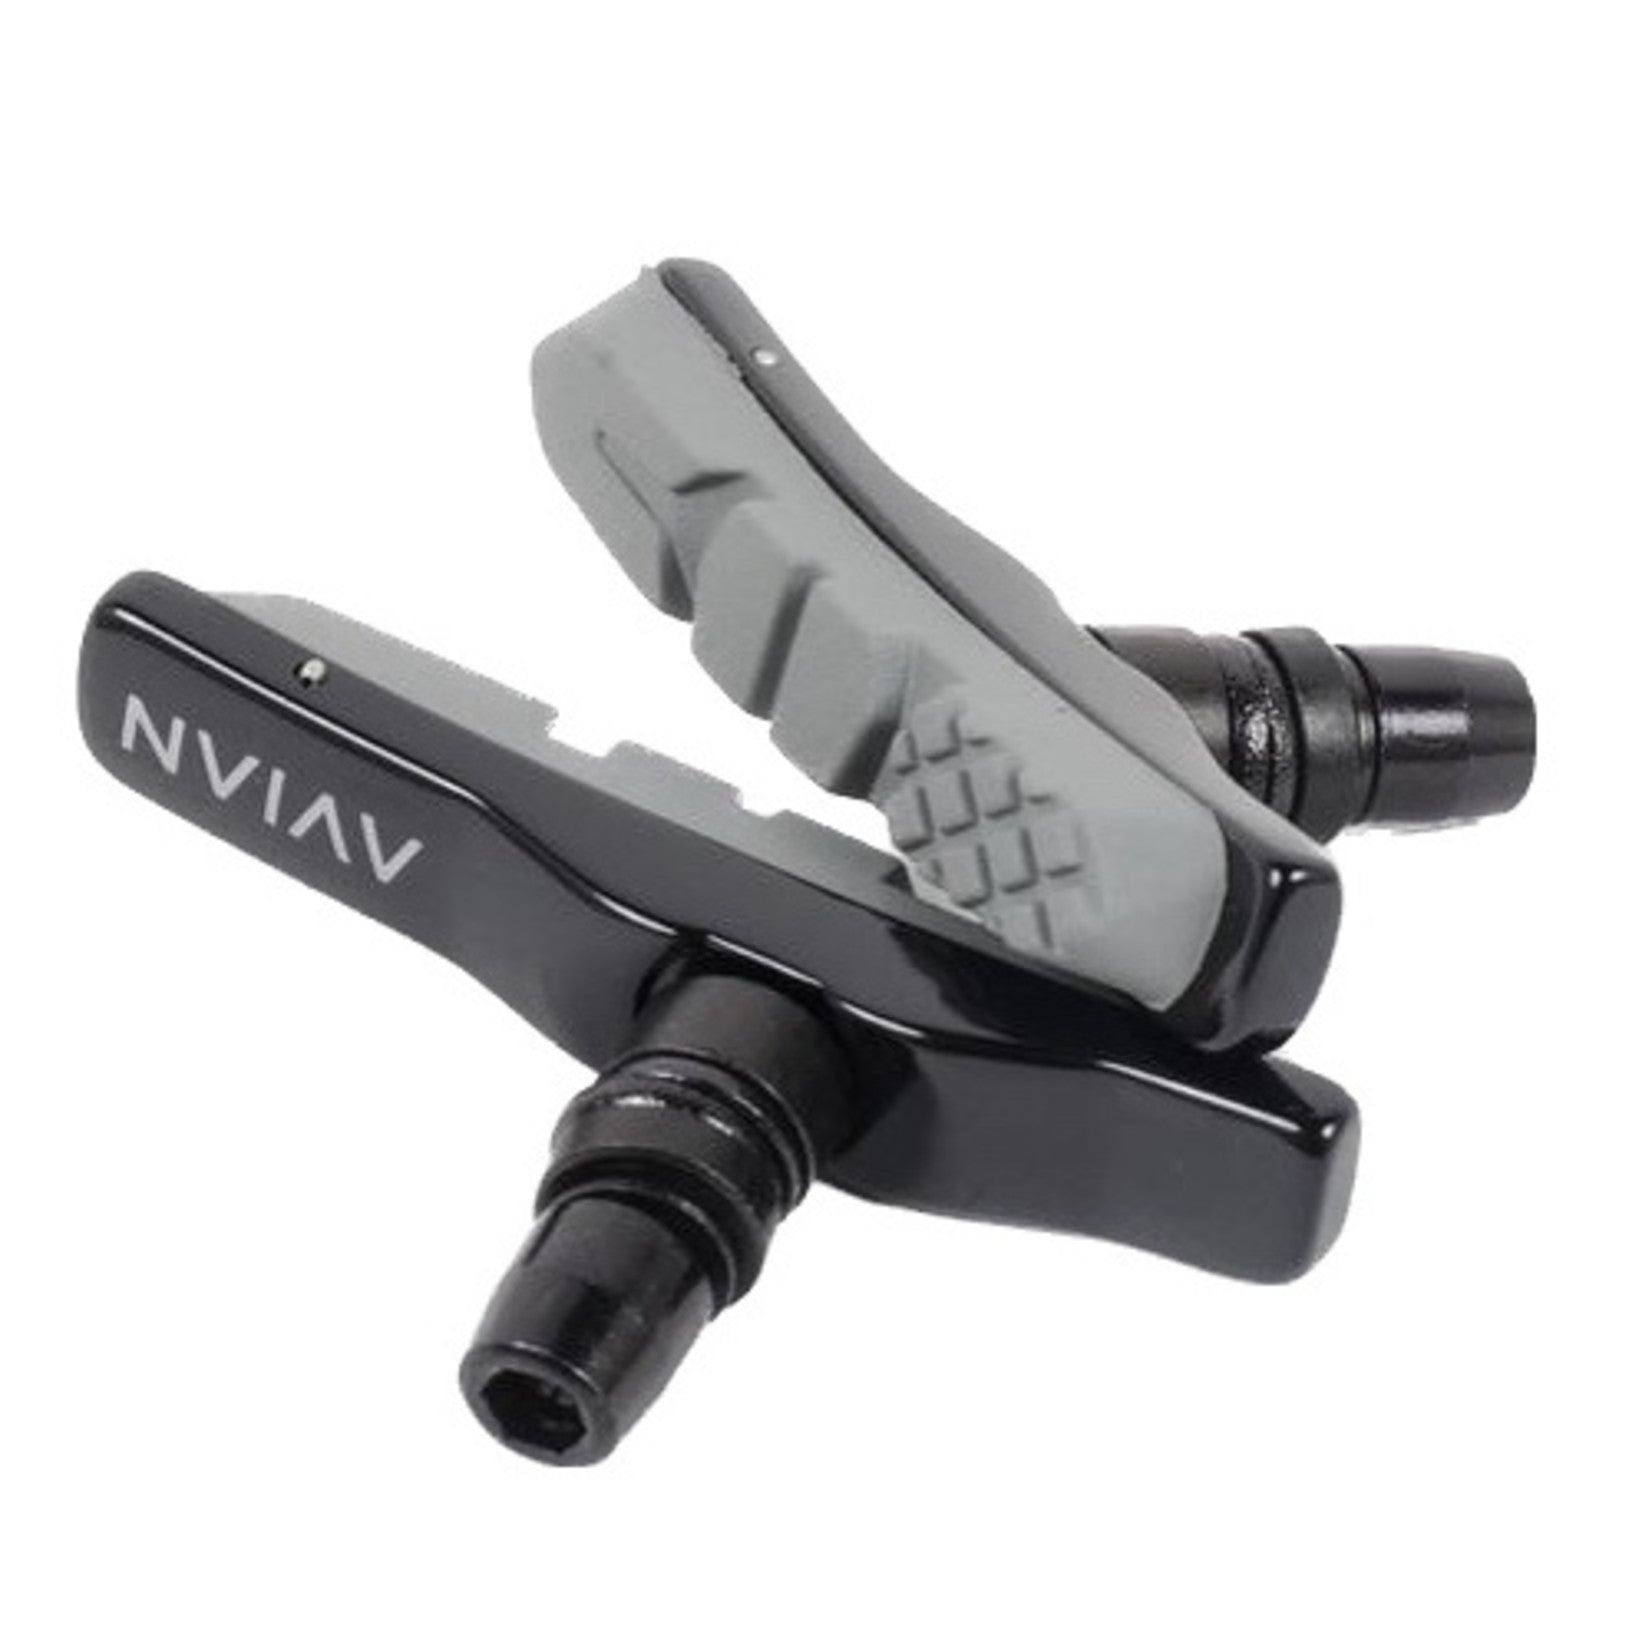 A pair of Avian Carbon Brake Pads adorned with the word vnn.